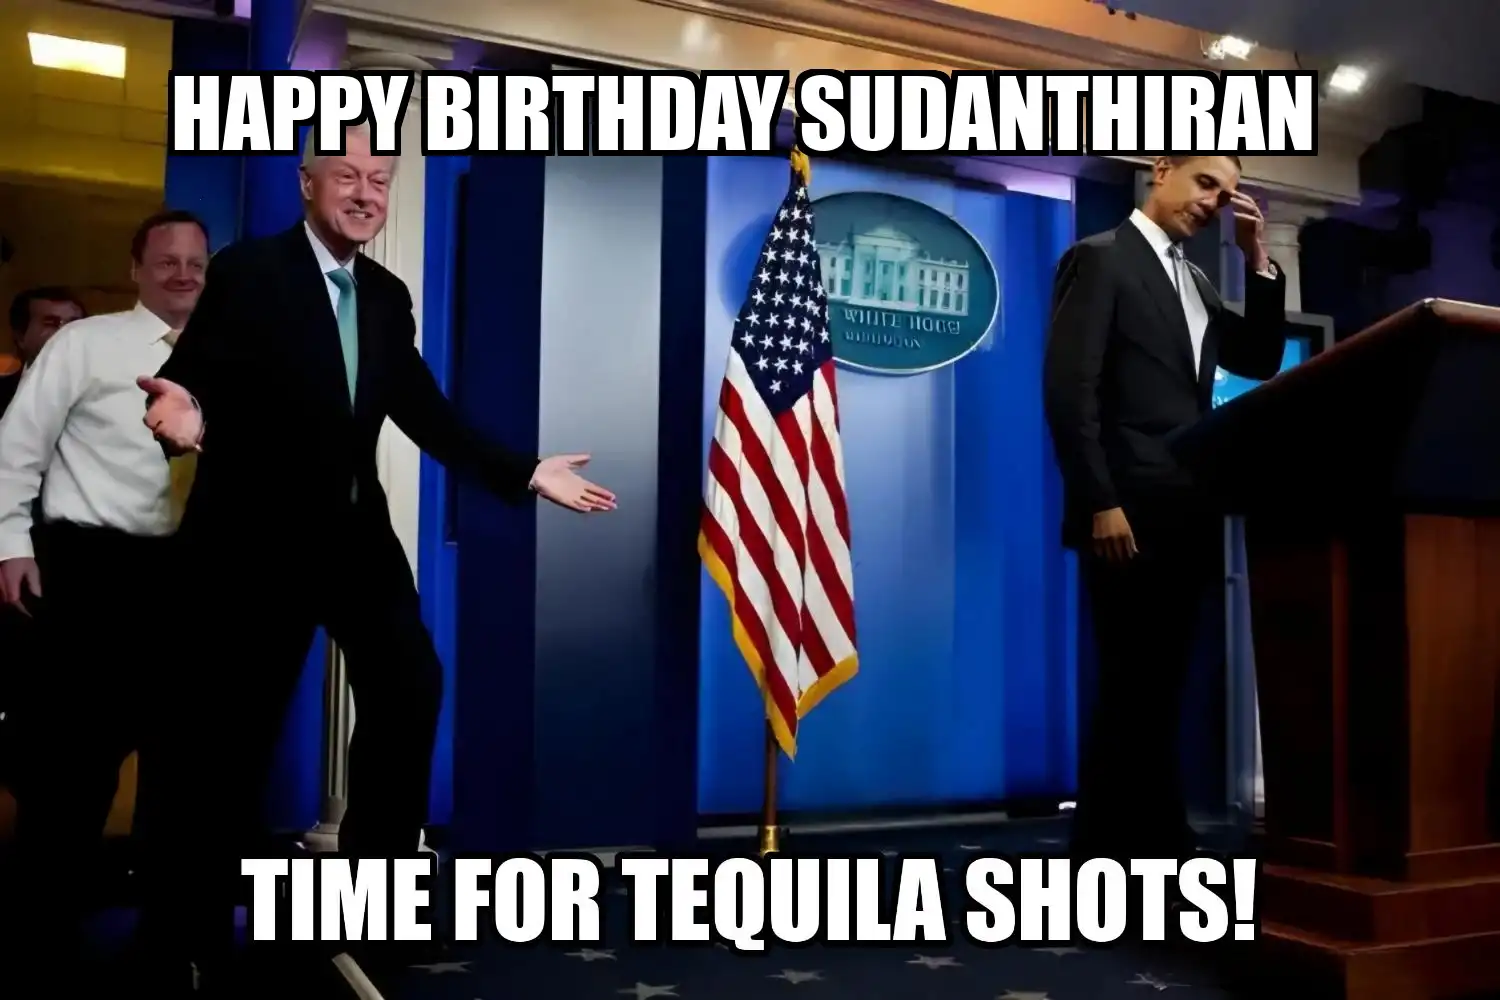 Happy Birthday Sudanthiran Time For Tequila Shots Memes